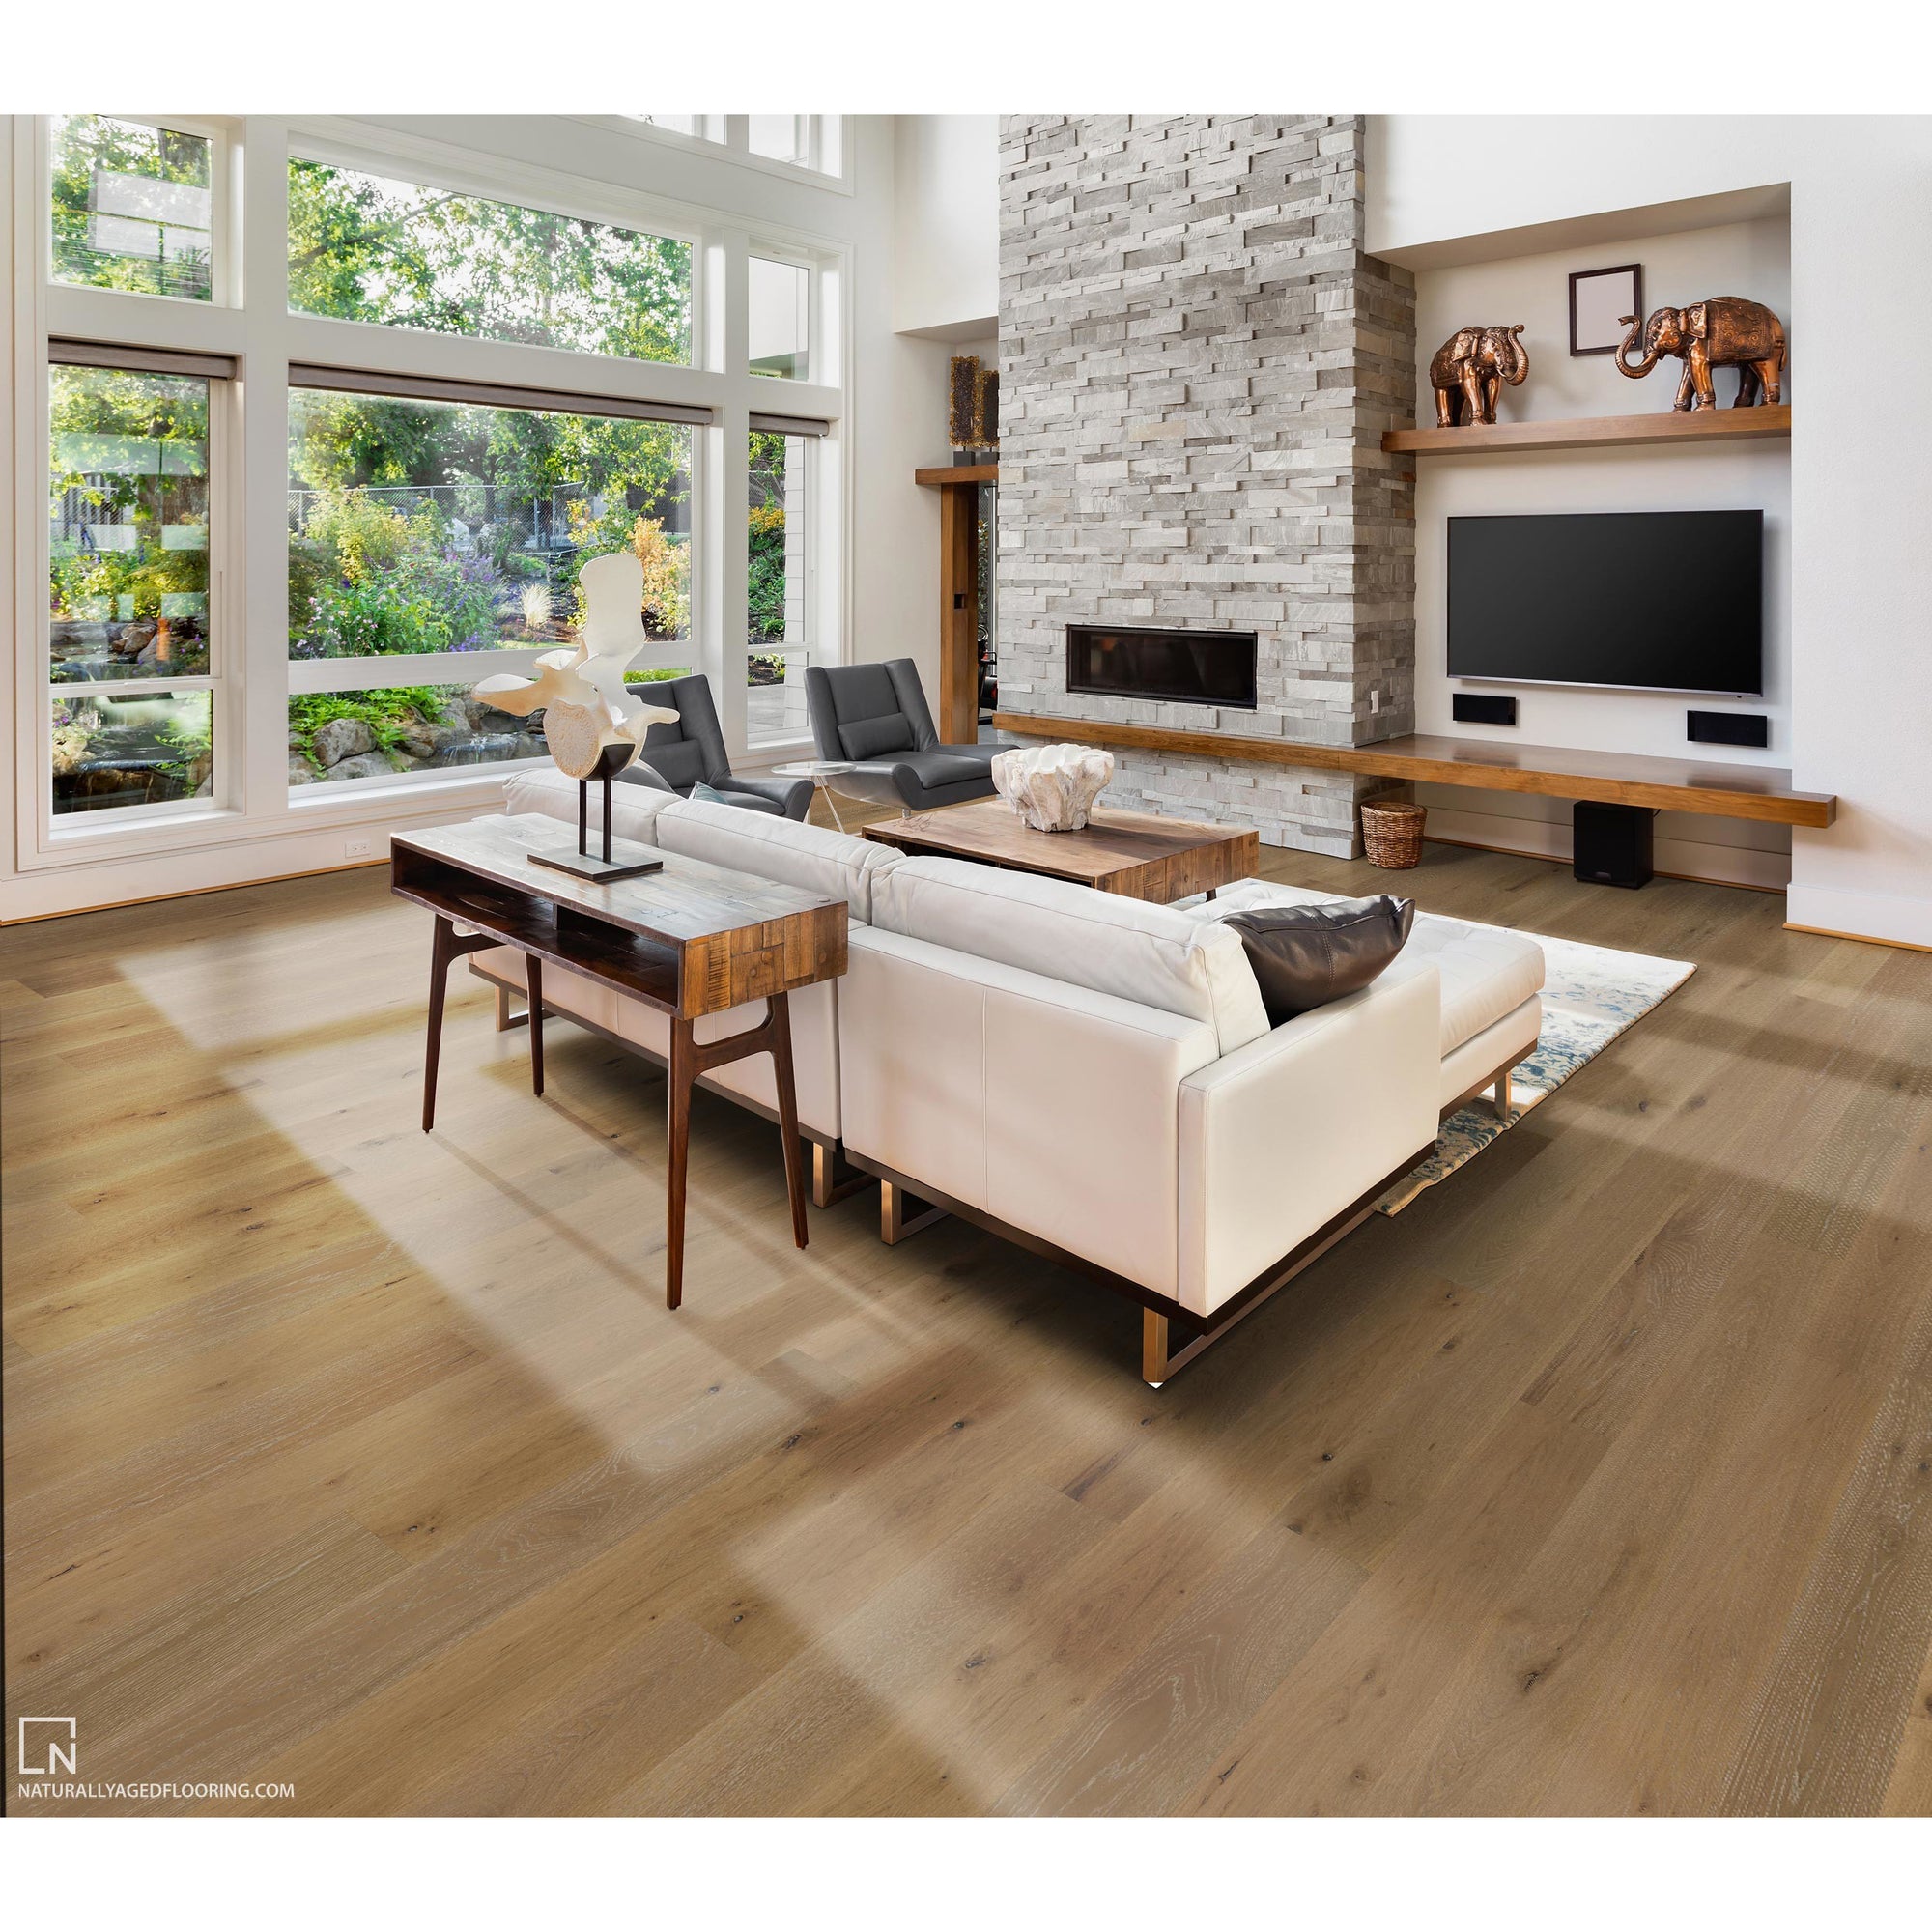 Naturally Aged Flooring - Pinnacle Collection - Crown